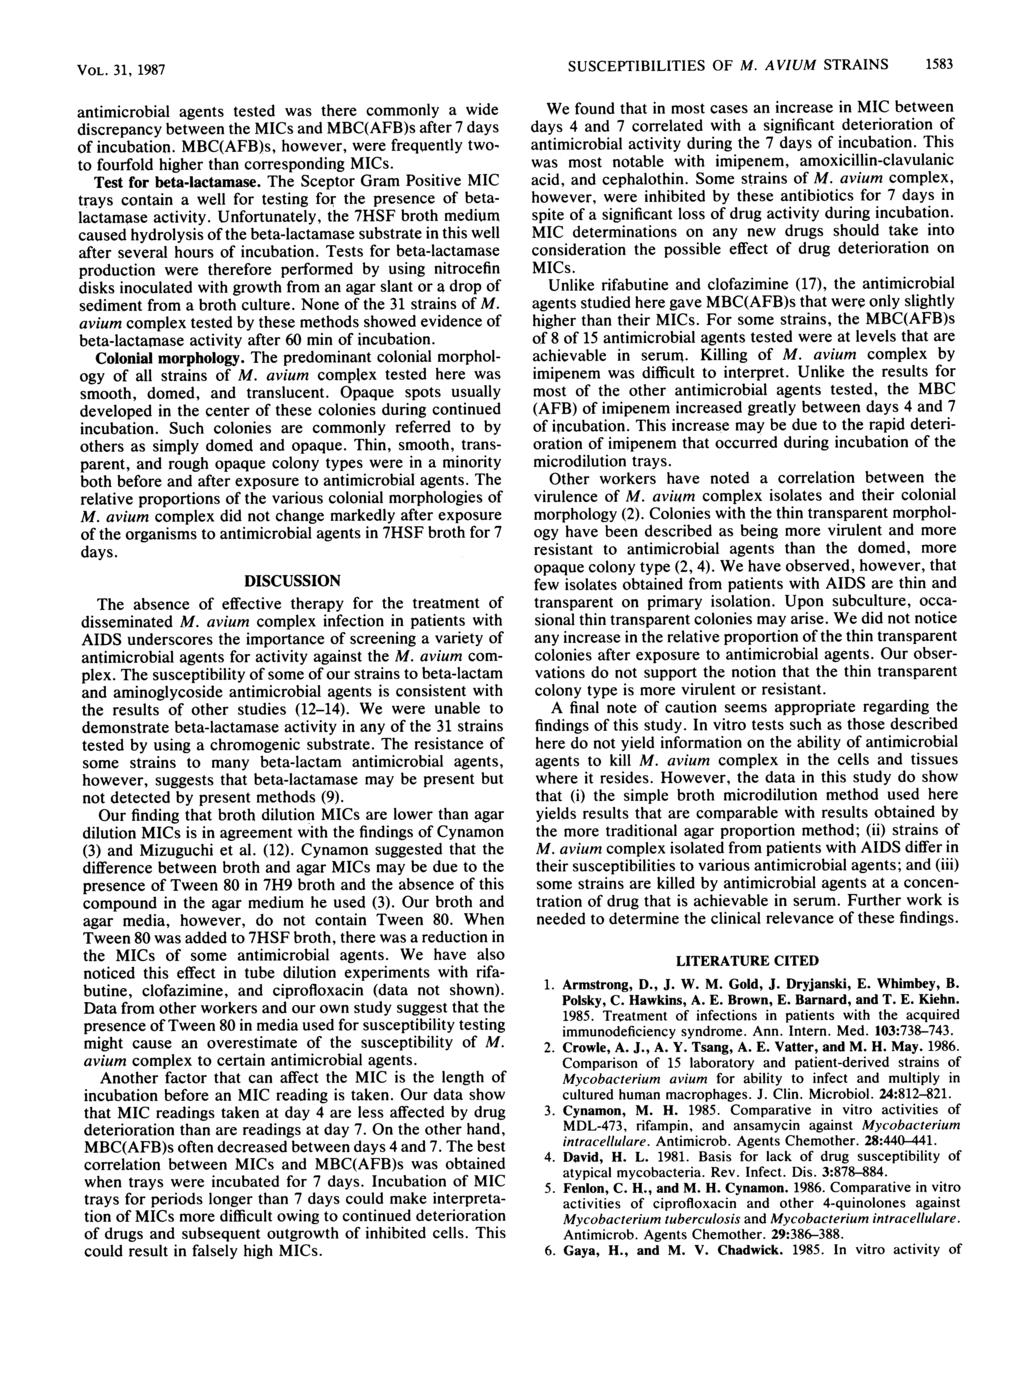 VOL. 31, 1987 antimicrobial agents tested was there commonly a wide discrepancy between the MICs and MBC(AFB)s after 7 days of incubation.